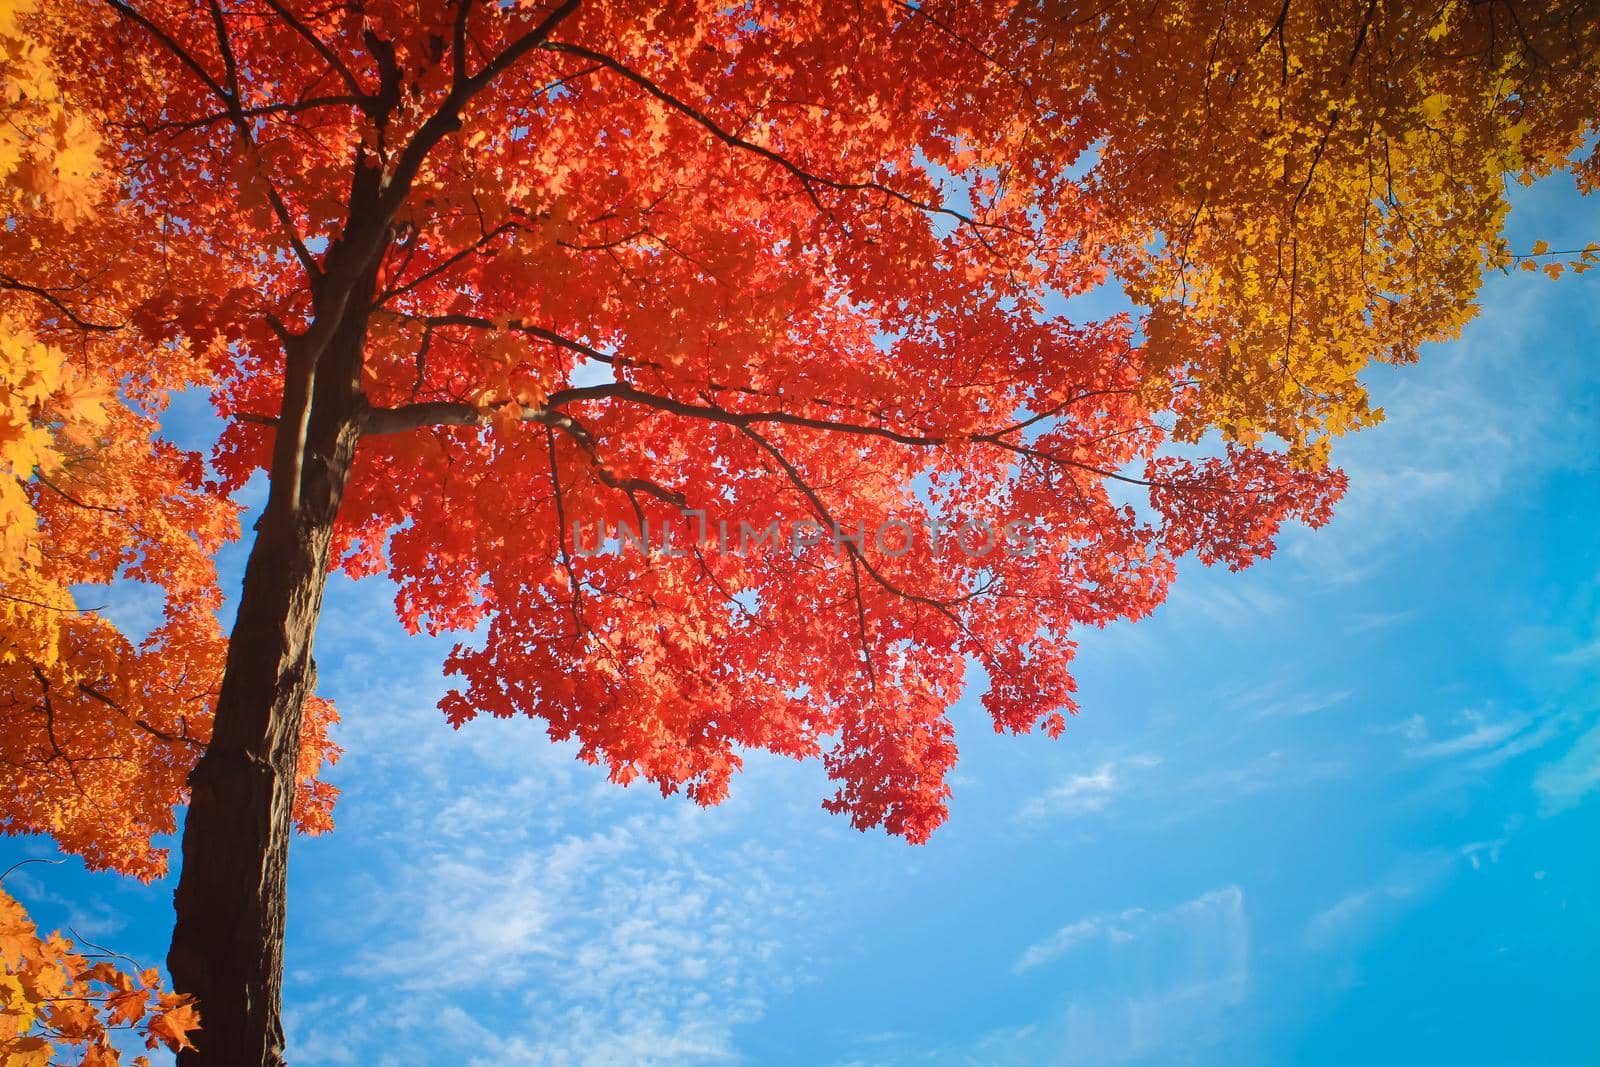 View of maple tree leaves with blue sky background. Autumn trees in a forest and clear blue sky with sun.